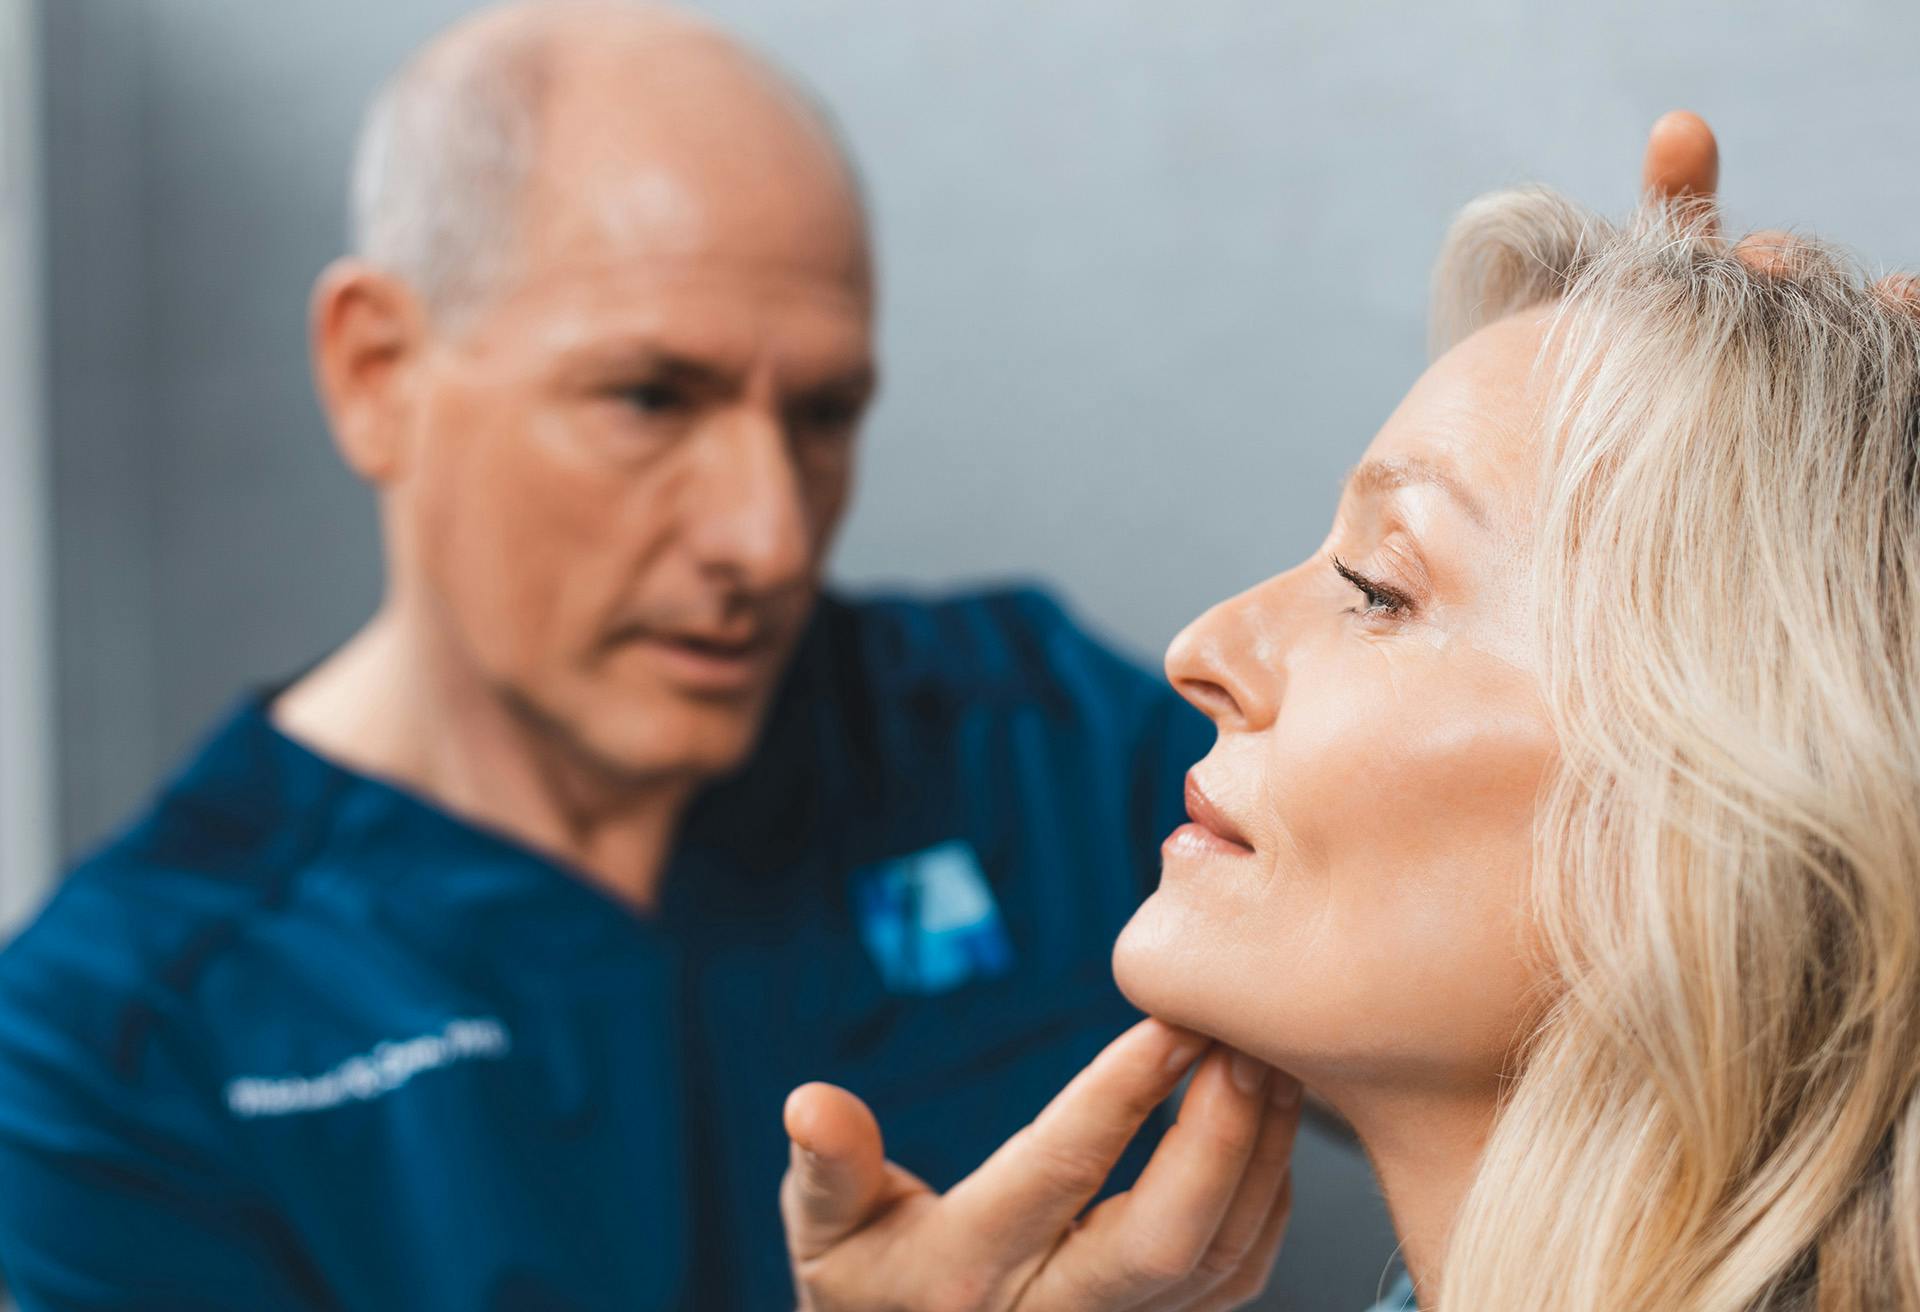 Dr. Zenn examining a patients face with his hand on her chin